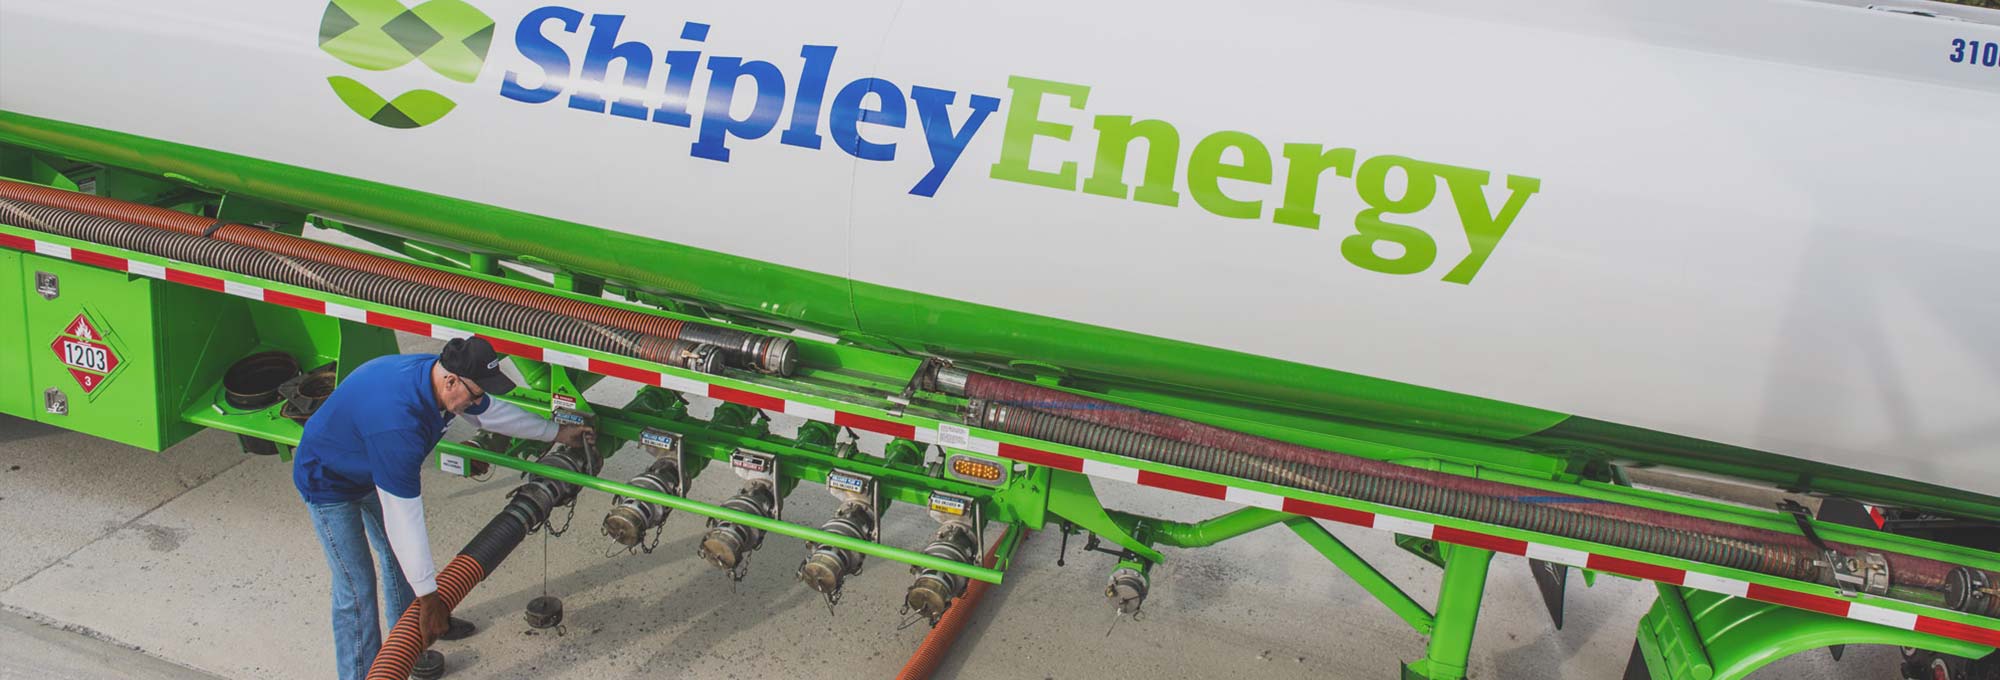 Trust Shipley Energy to Deliver Warmth